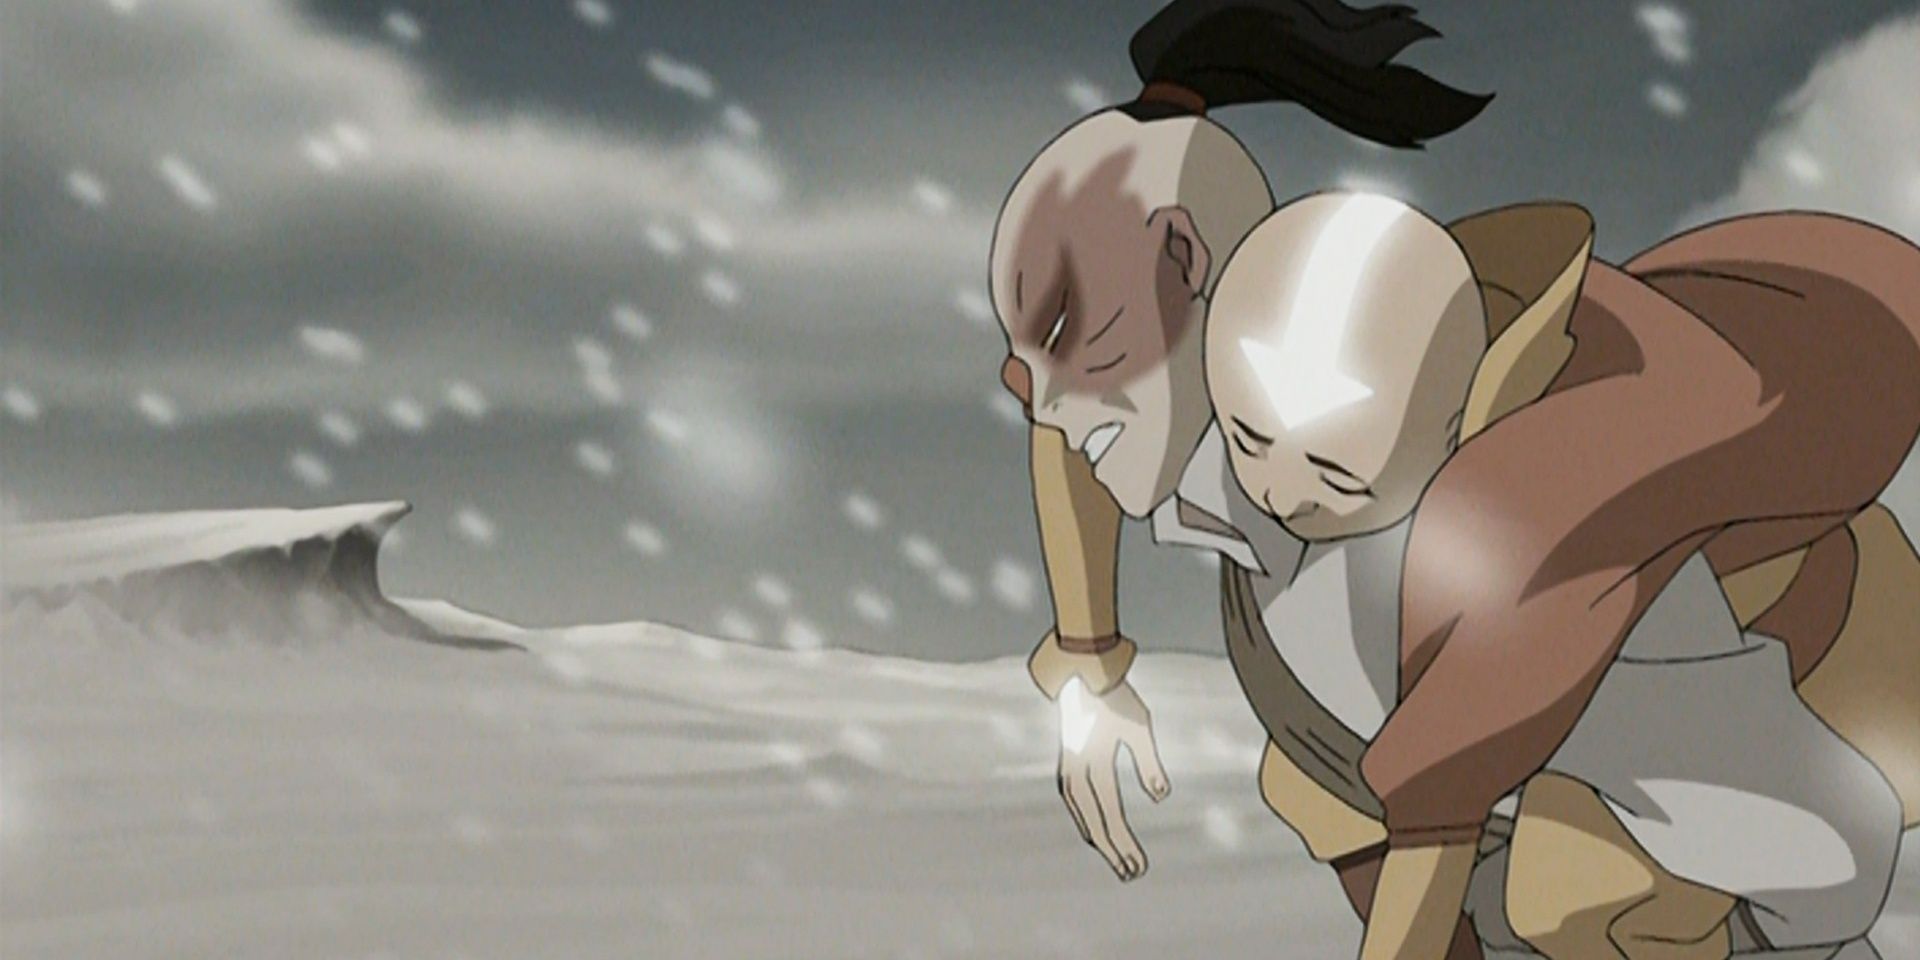 Zuko drags Aang's body in the snow in Avatar 